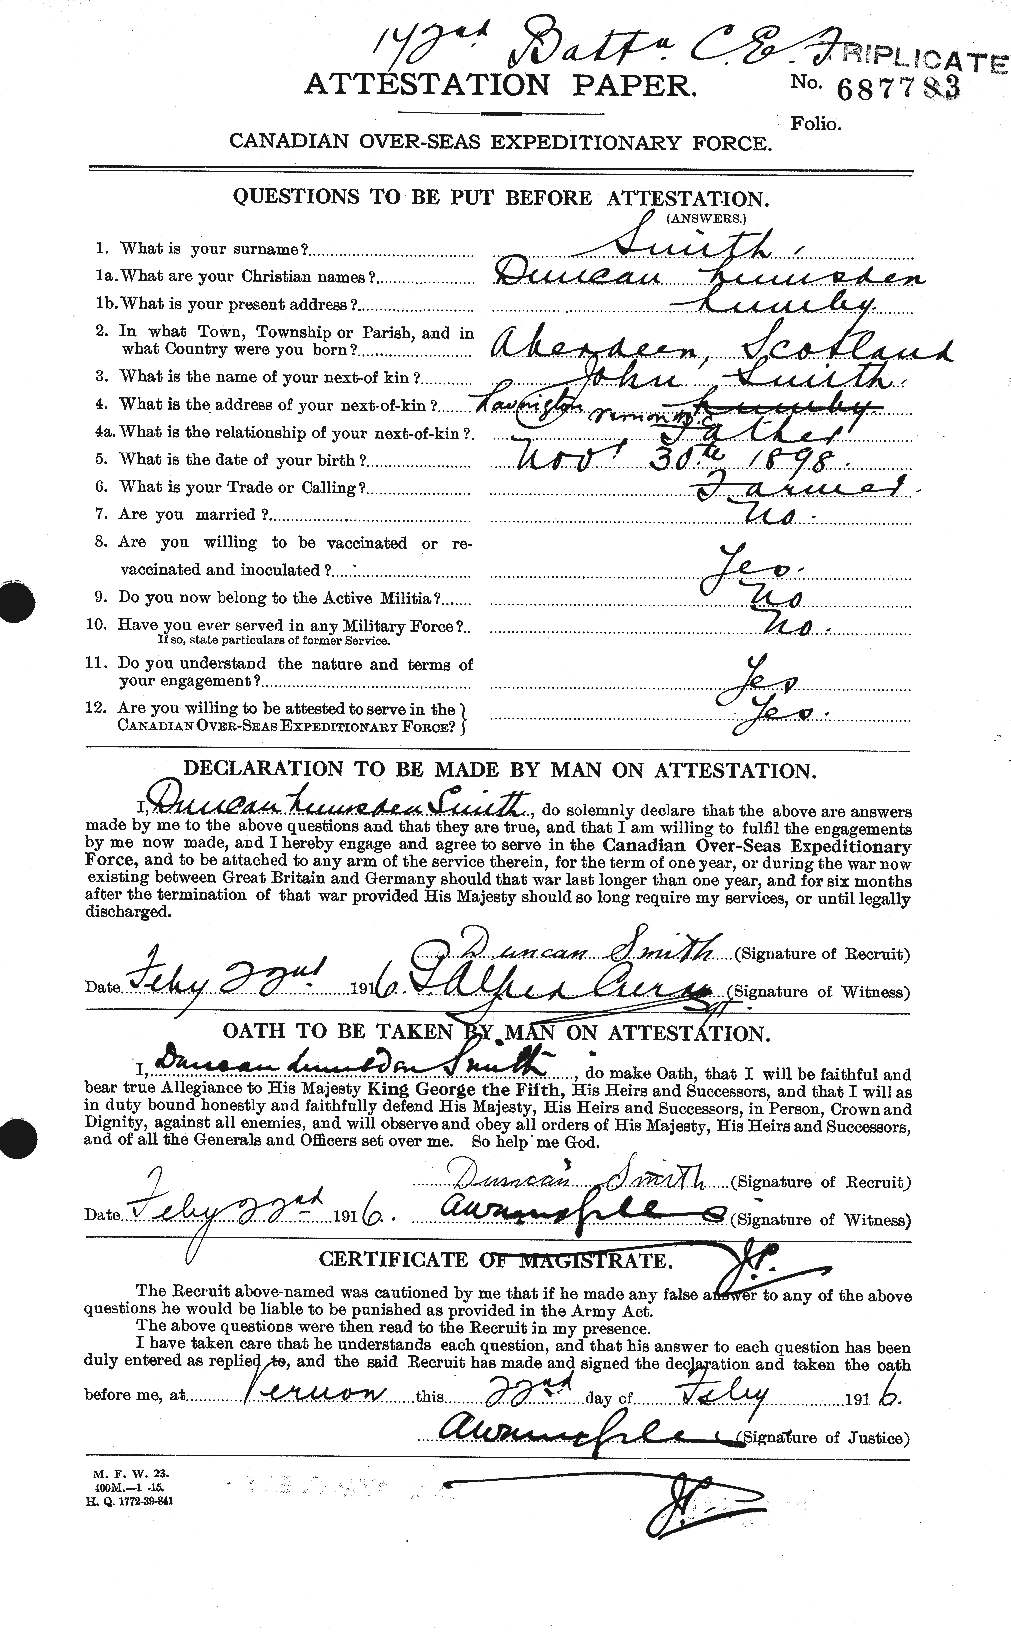 Personnel Records of the First World War - CEF 101750a